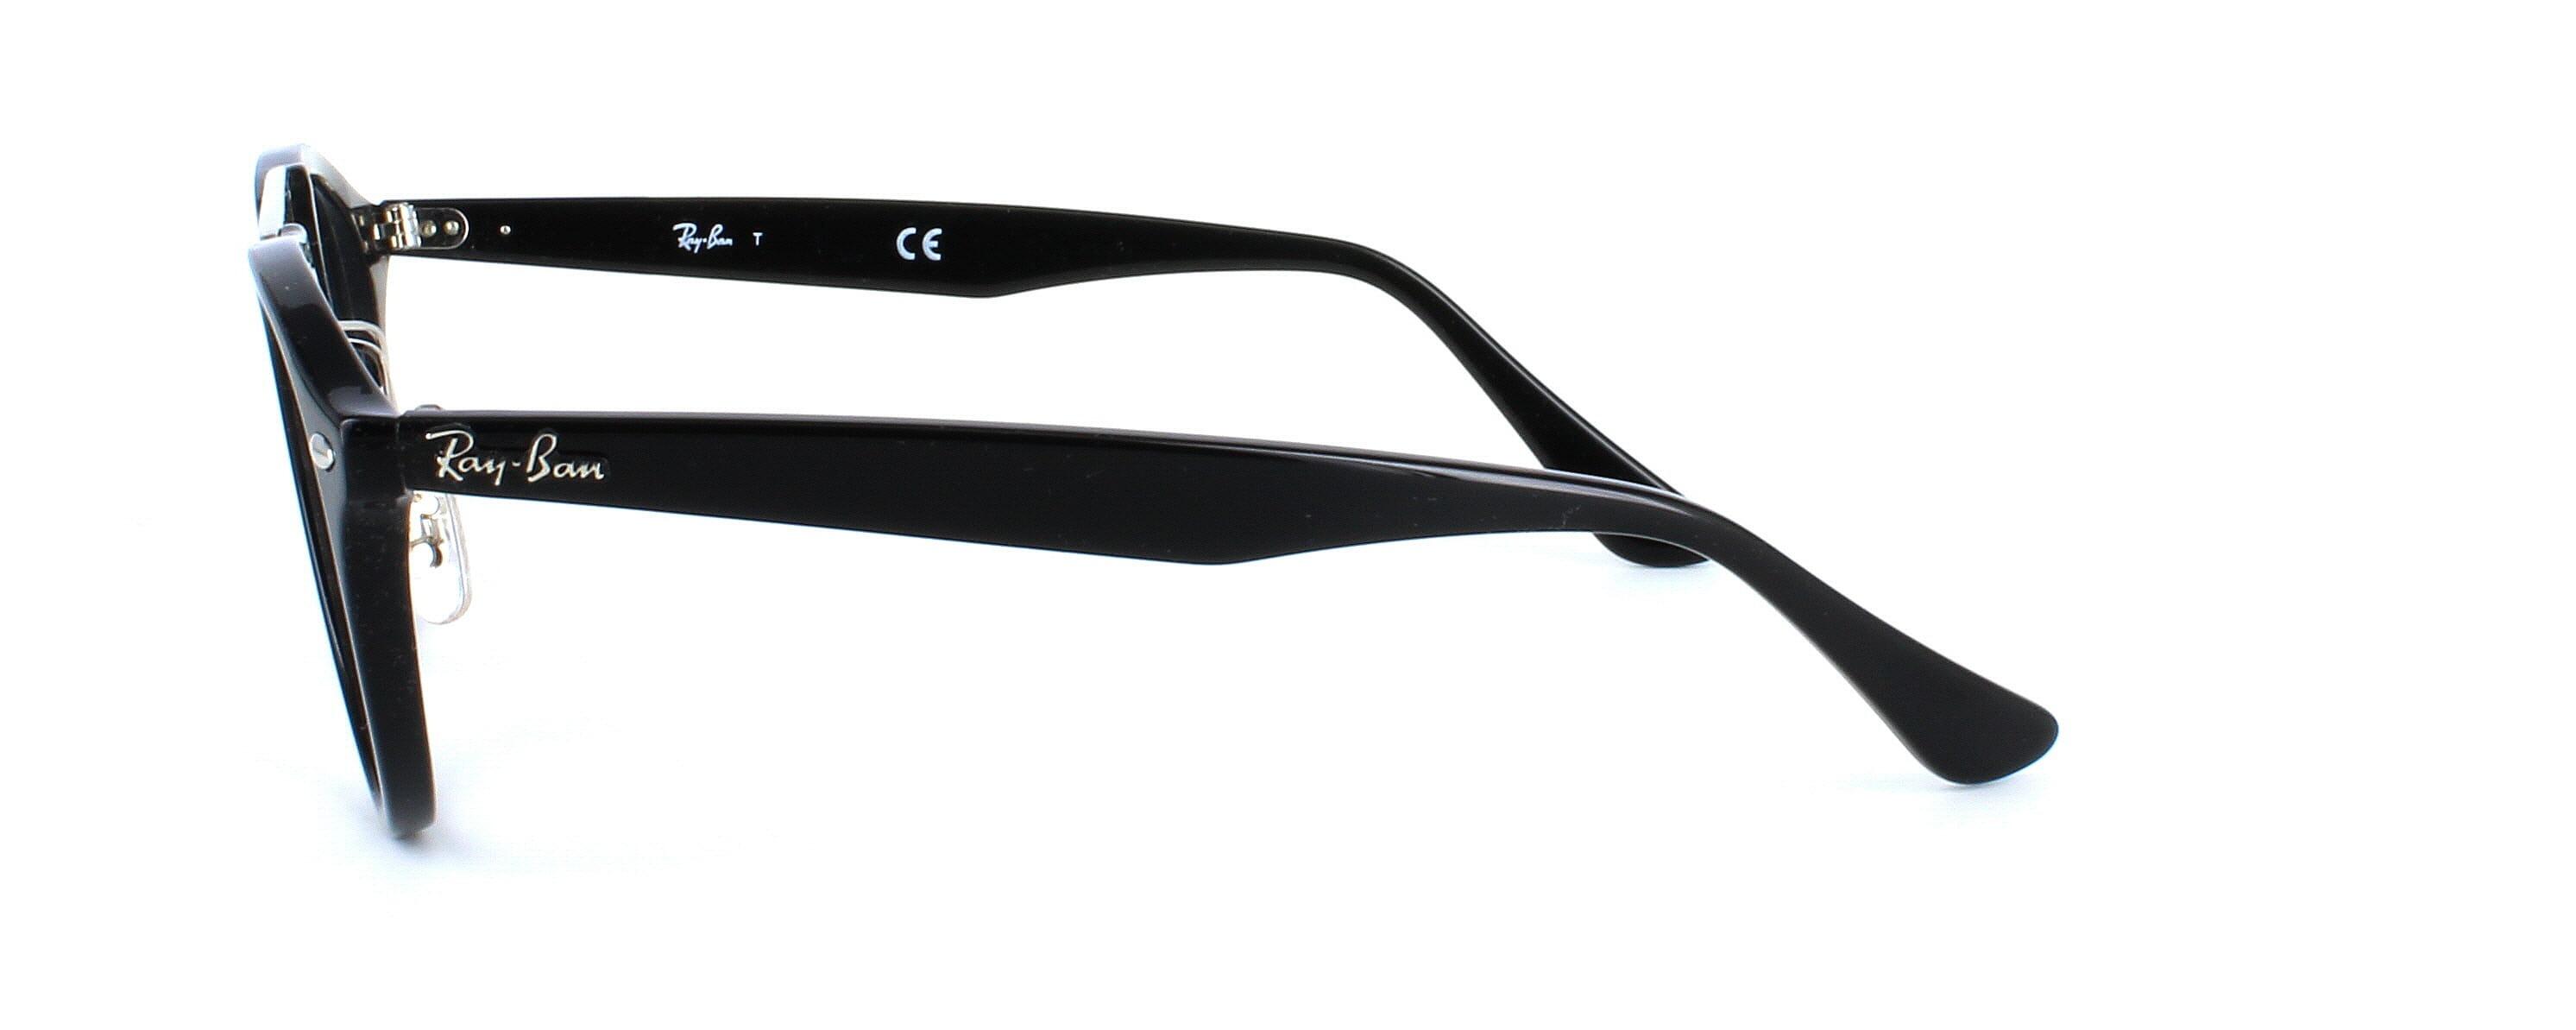 Ray Ban 5347 - Ladies acetate & metal combination frame. Black face & arms with double metal nose bridge in silver - image view 3